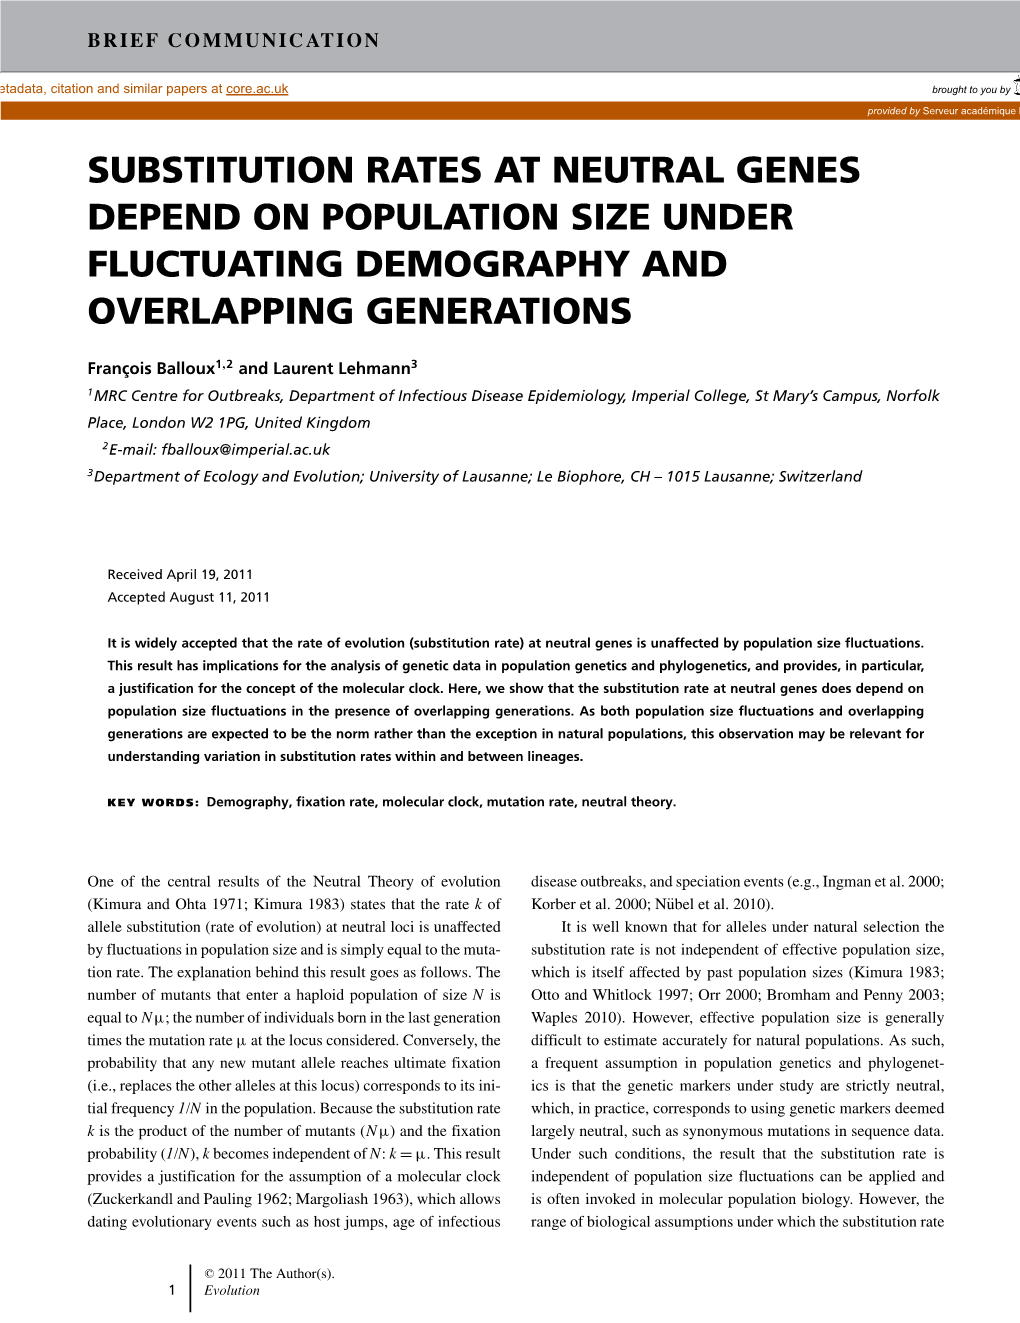 Substitution Rates at Neutral Genes Depend on Population Size Under Fluctuating Demography and Overlapping Generations